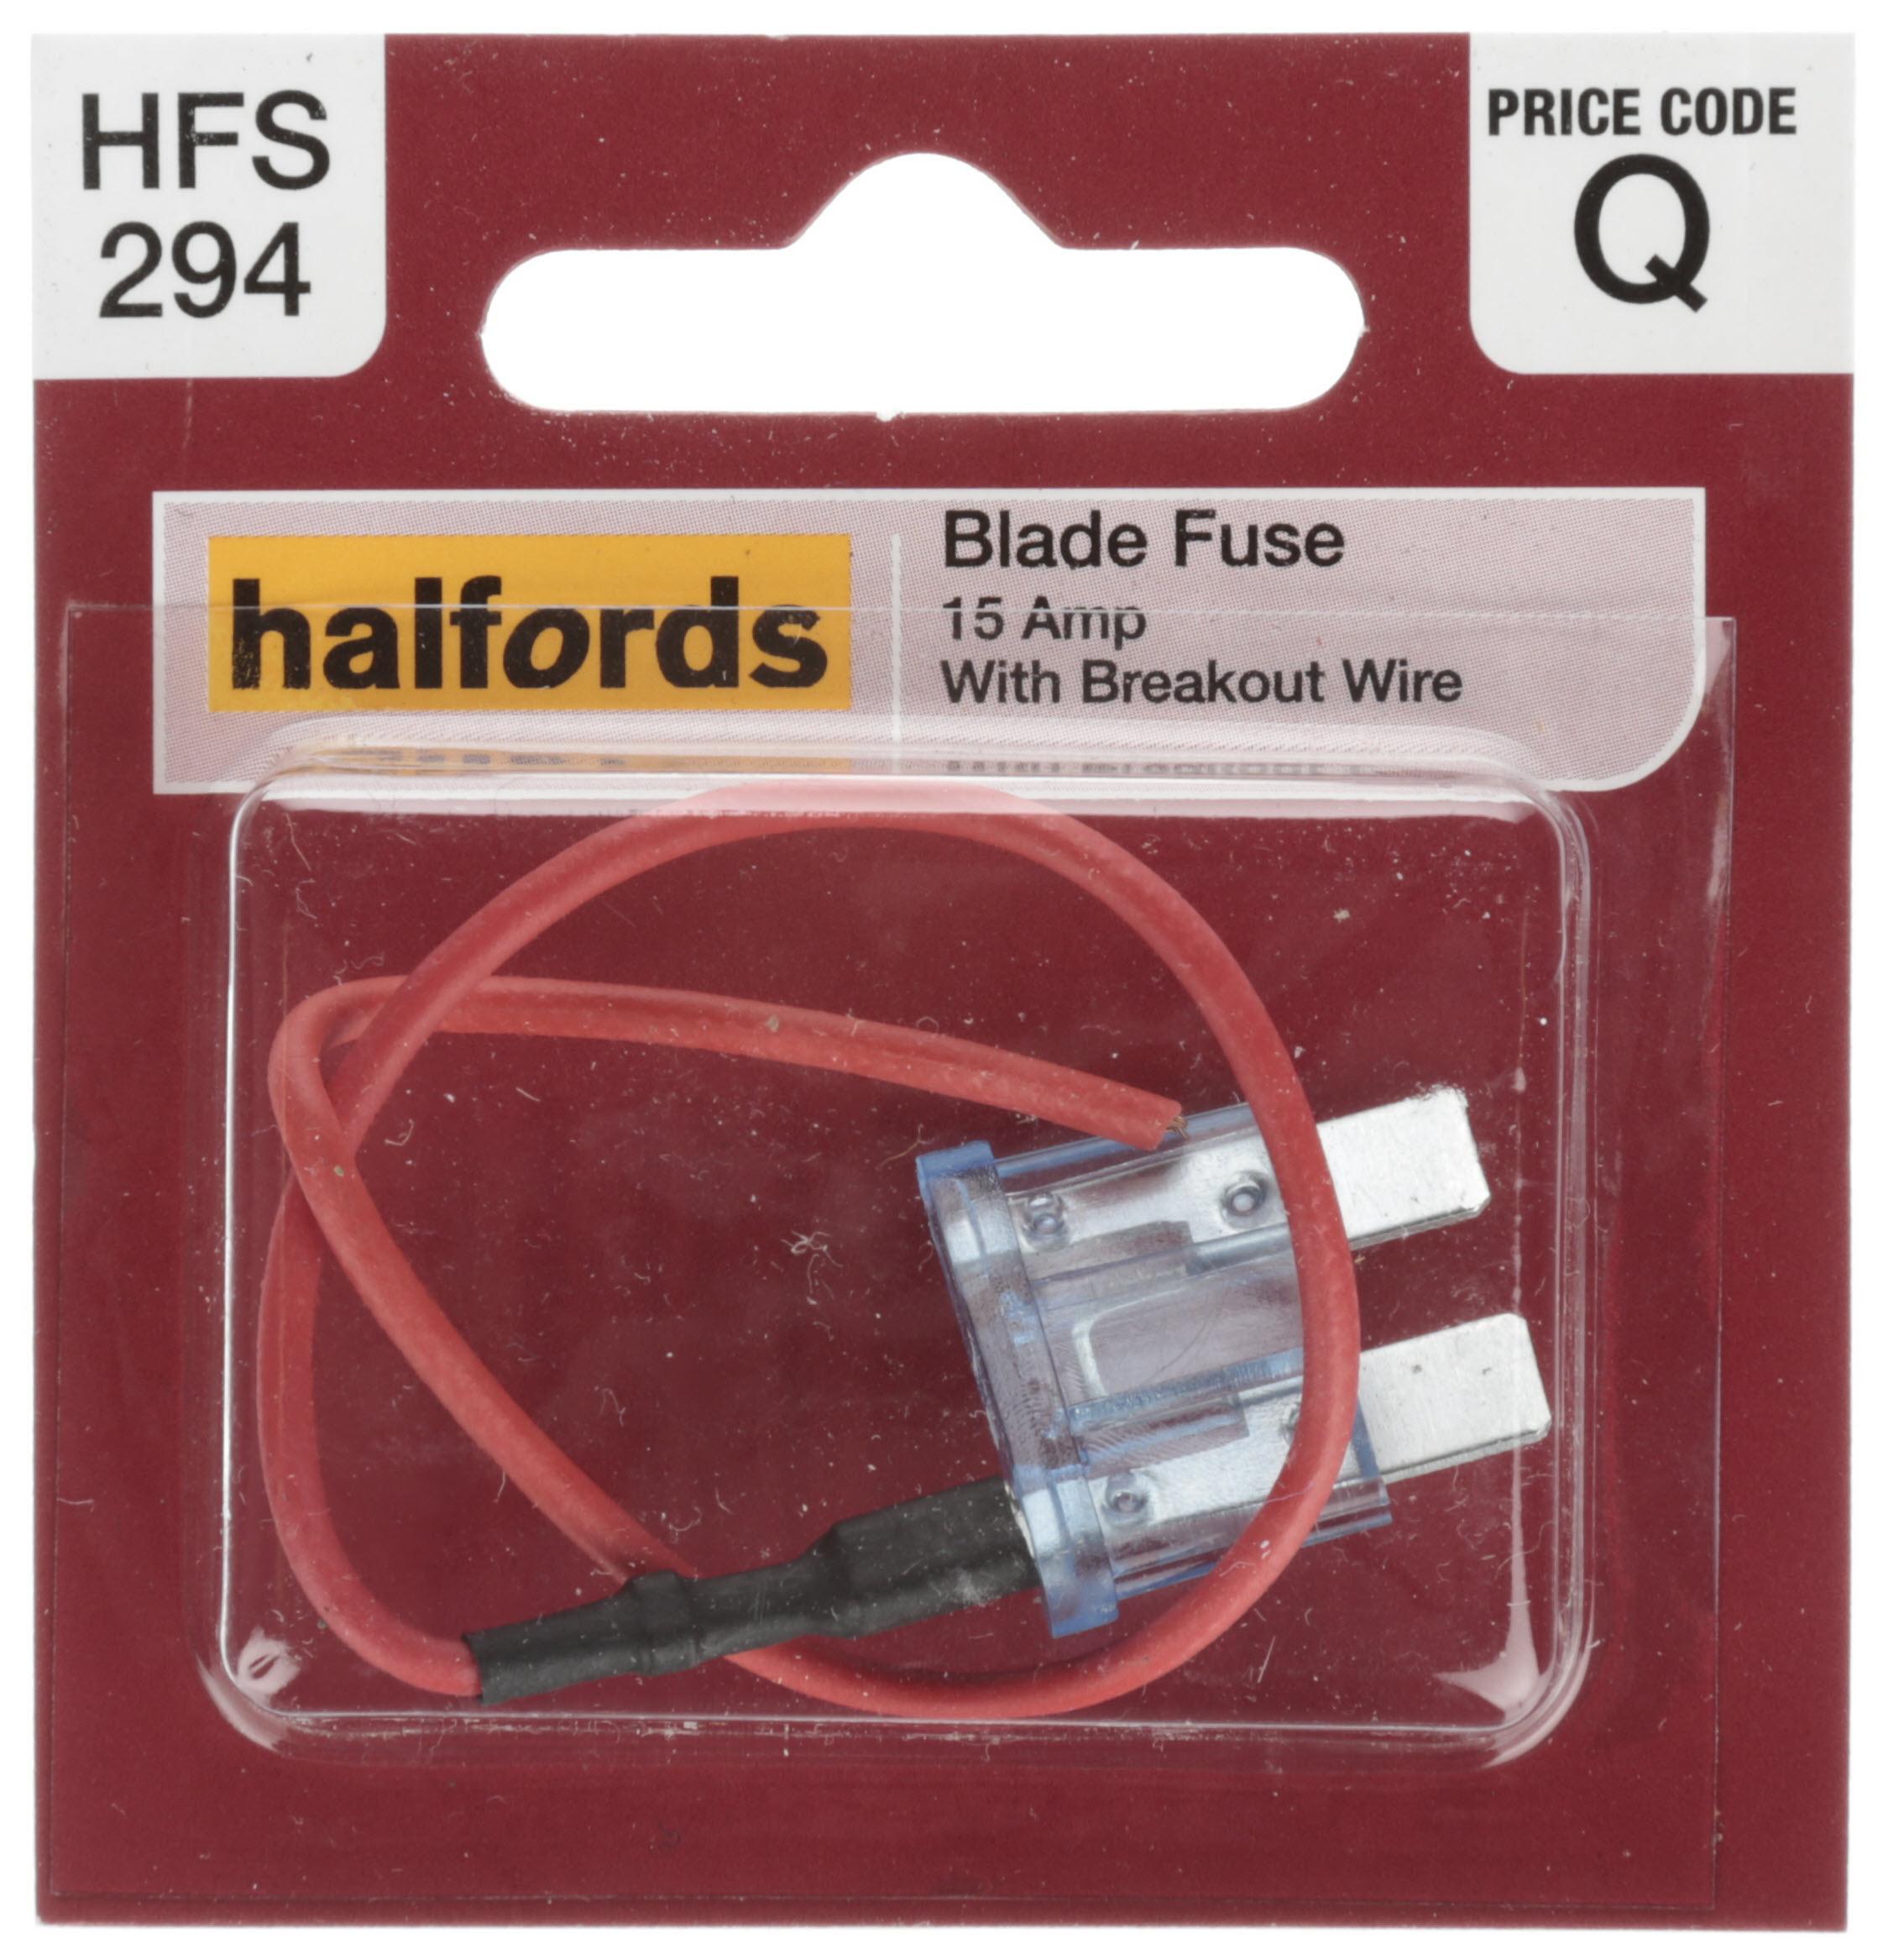 Halfords Blade Fuse + Breakout Wire 15 Amp (Hfs294)